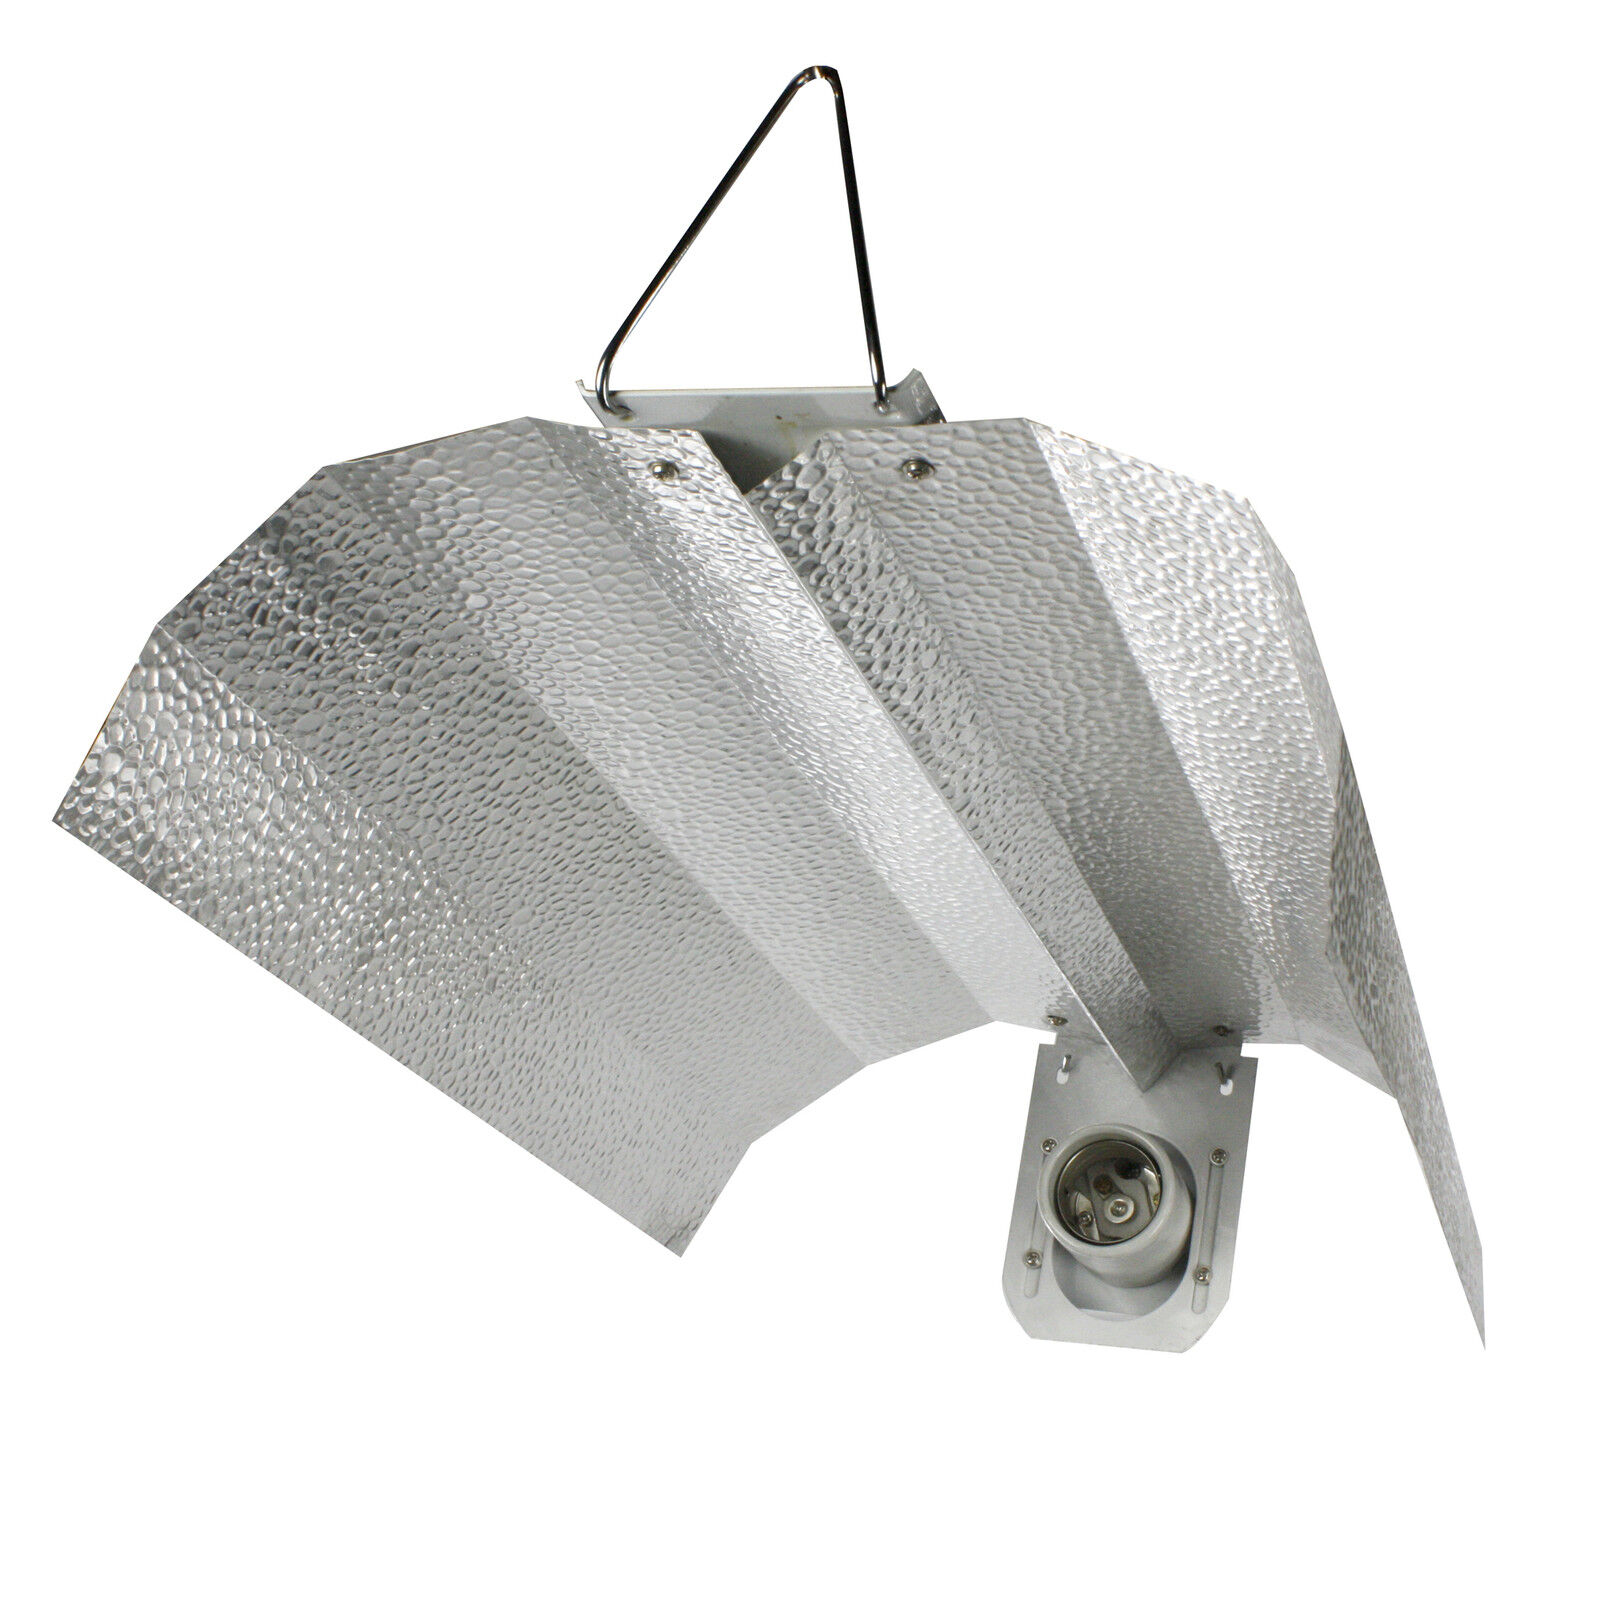 Apollo Horticulture Grow Light Reflector Hood for Plant Growing - Pick Your Hood